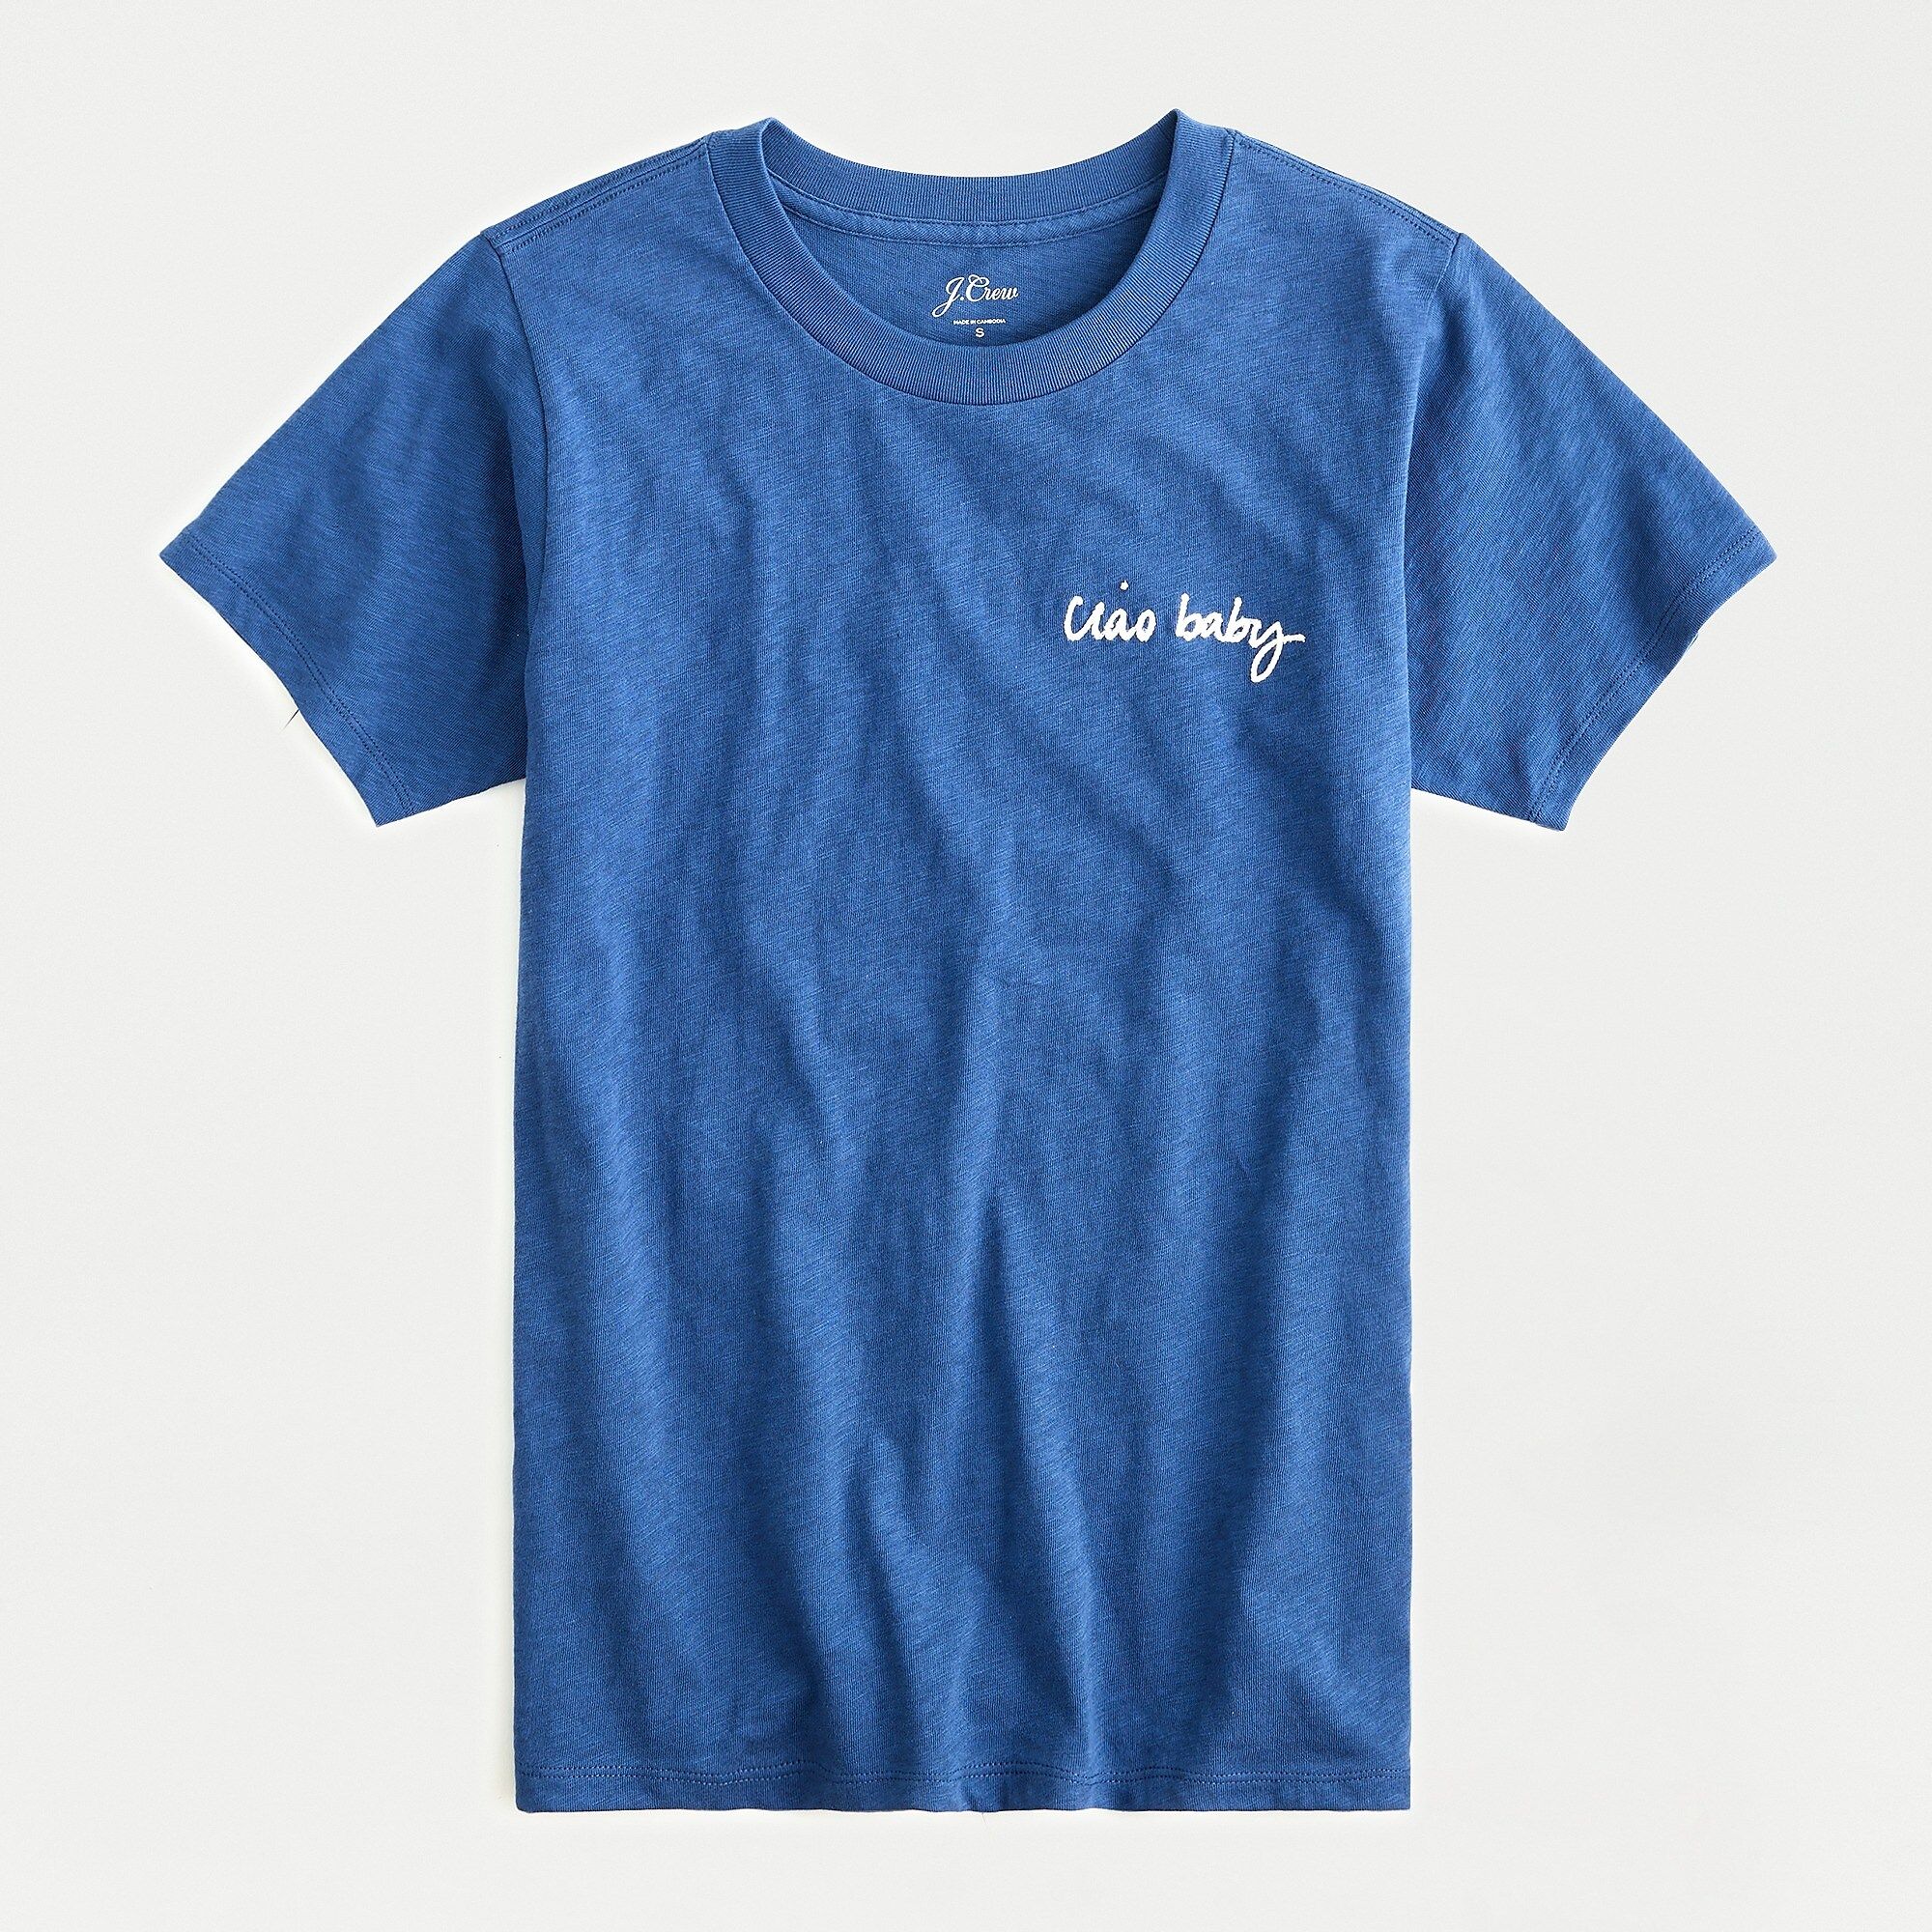 "Ciao baby" short-sleeve cotton T-shirt | J.Crew US